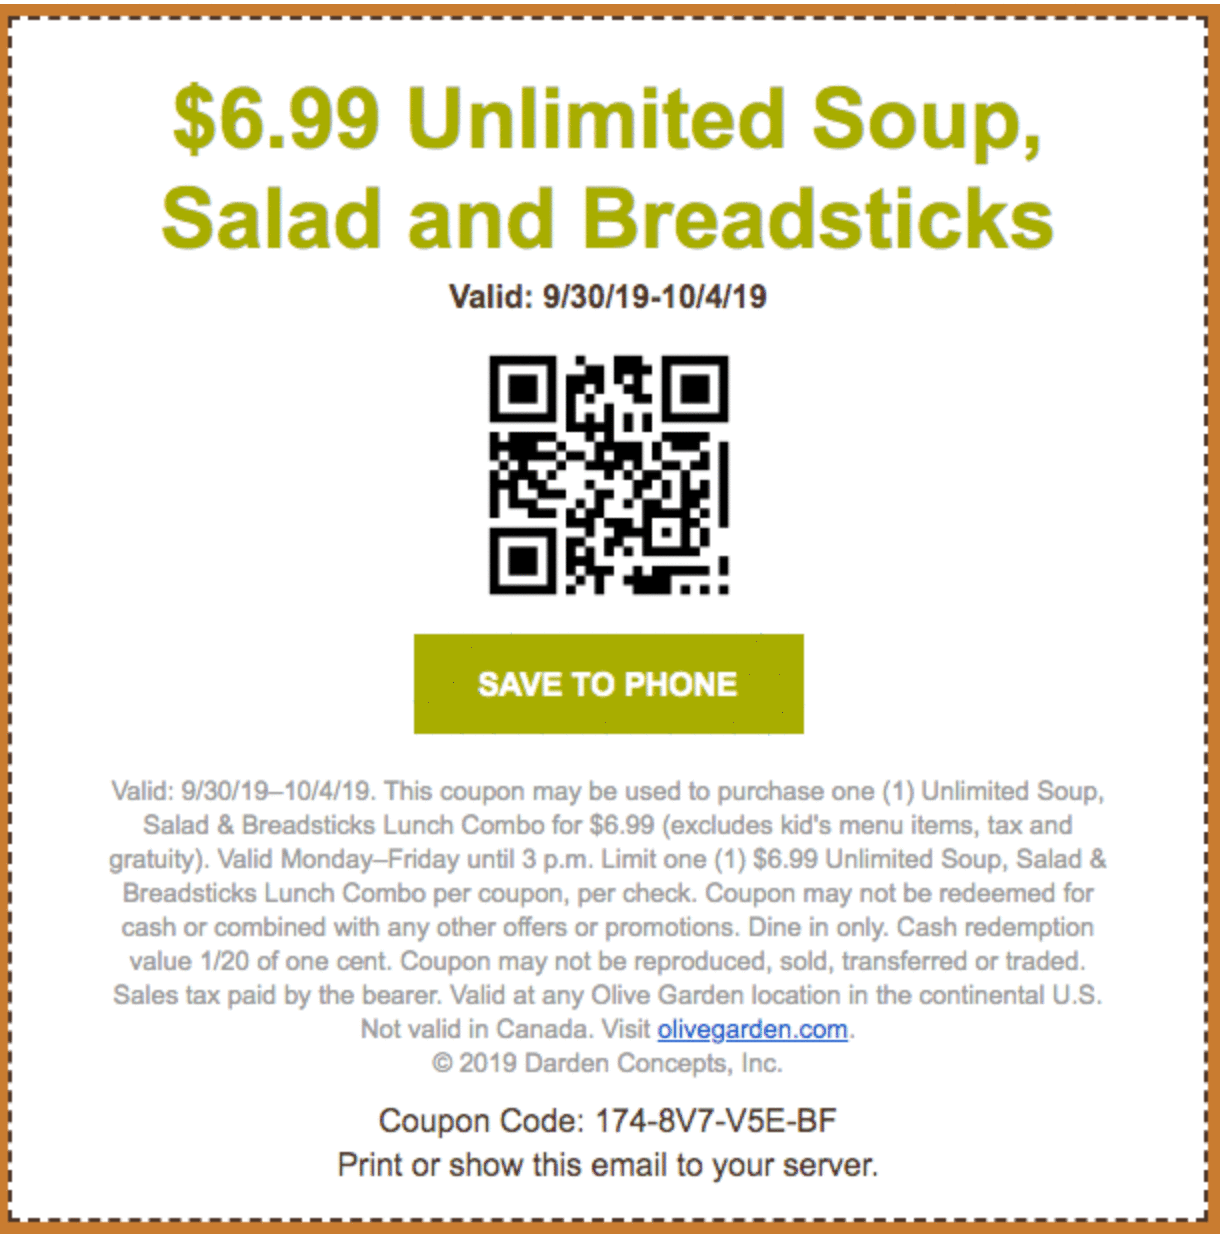 Olive Garden Coupon Code - Olive Garden Coupon Free Appetizer Or